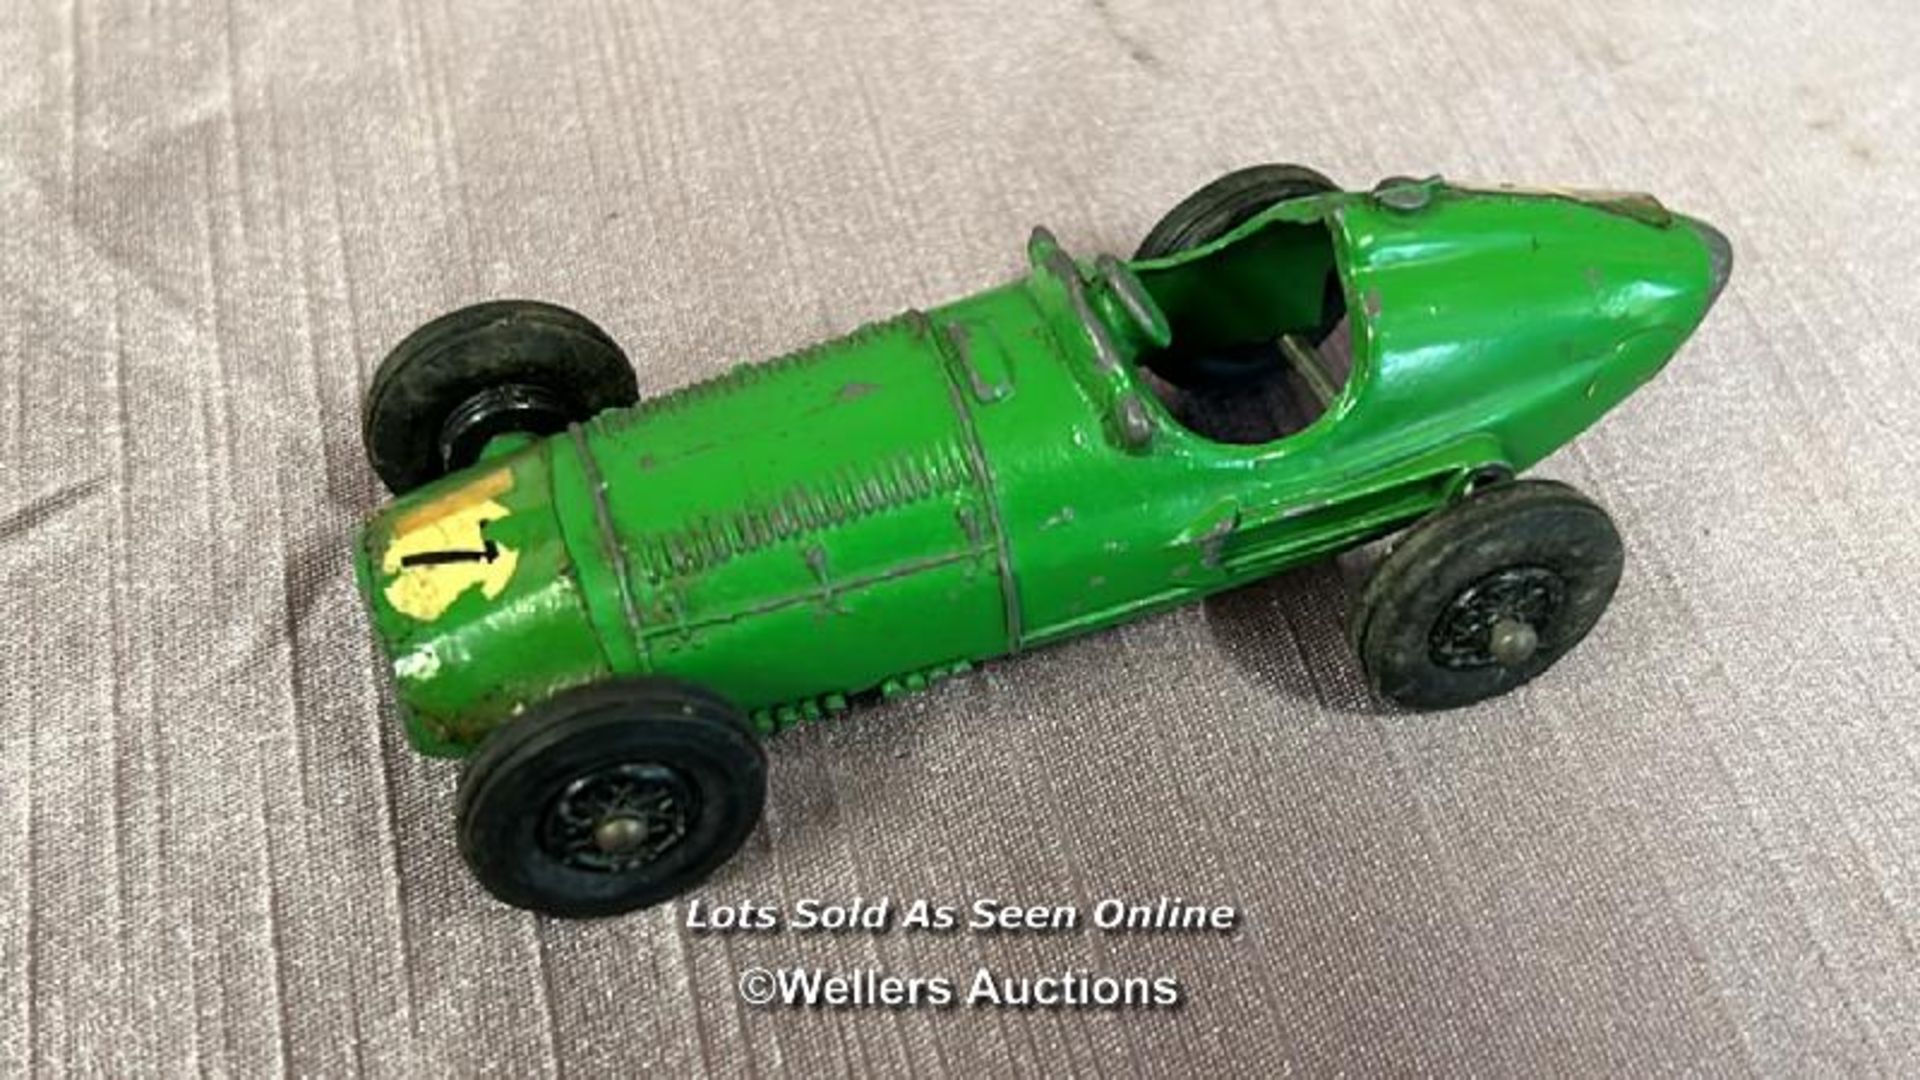 TWO MODEL CARS INCLUDING BLUE RACING CAR FOR SCALEXTRIC AND GREEN RACING CAR FRAME ONLY (AS FOUND) - Image 3 of 5